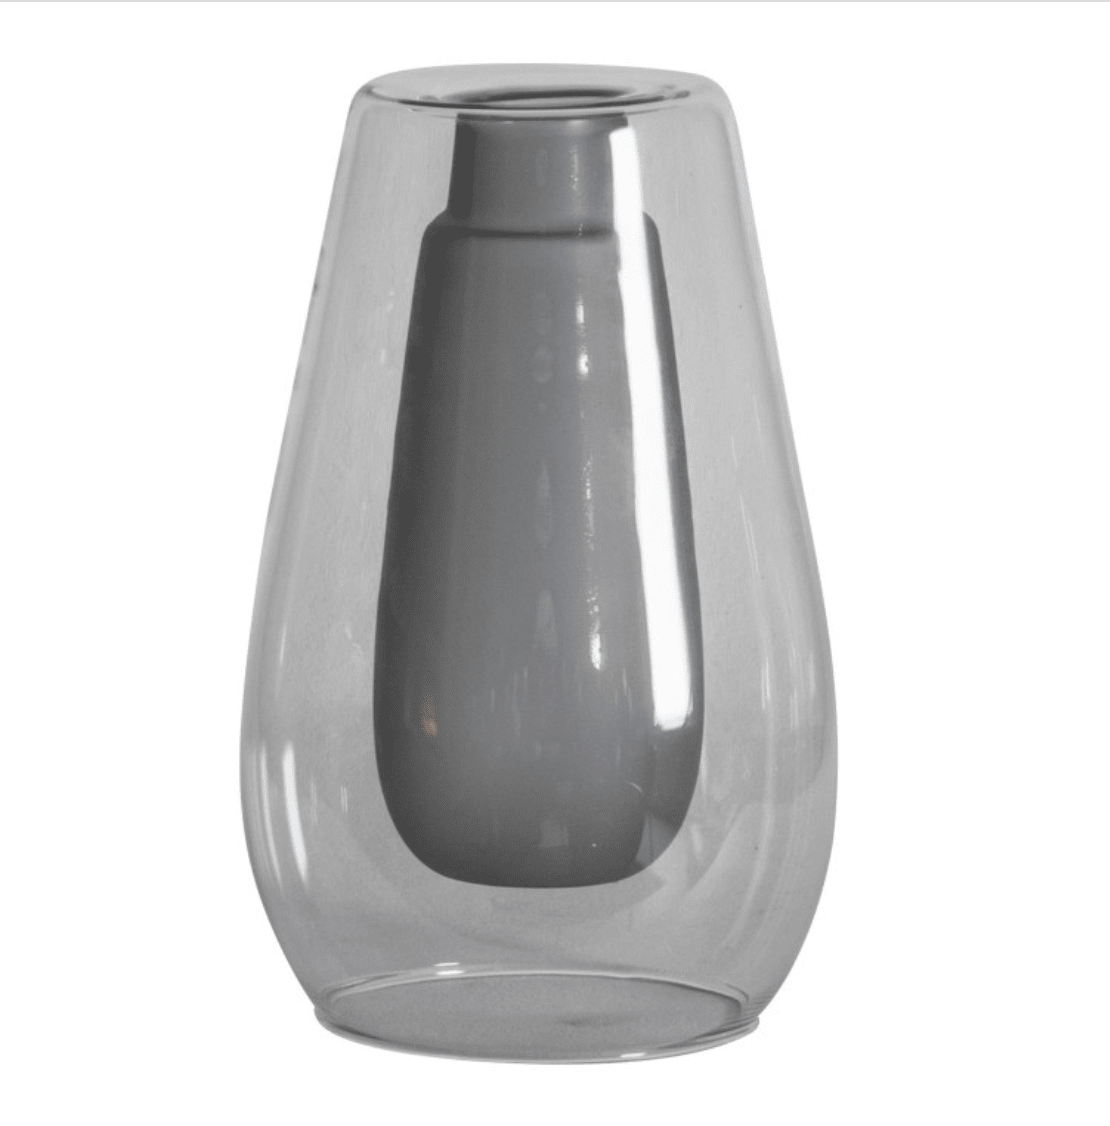 Suspended Tall Grey Vase - Outlet - Save 20%